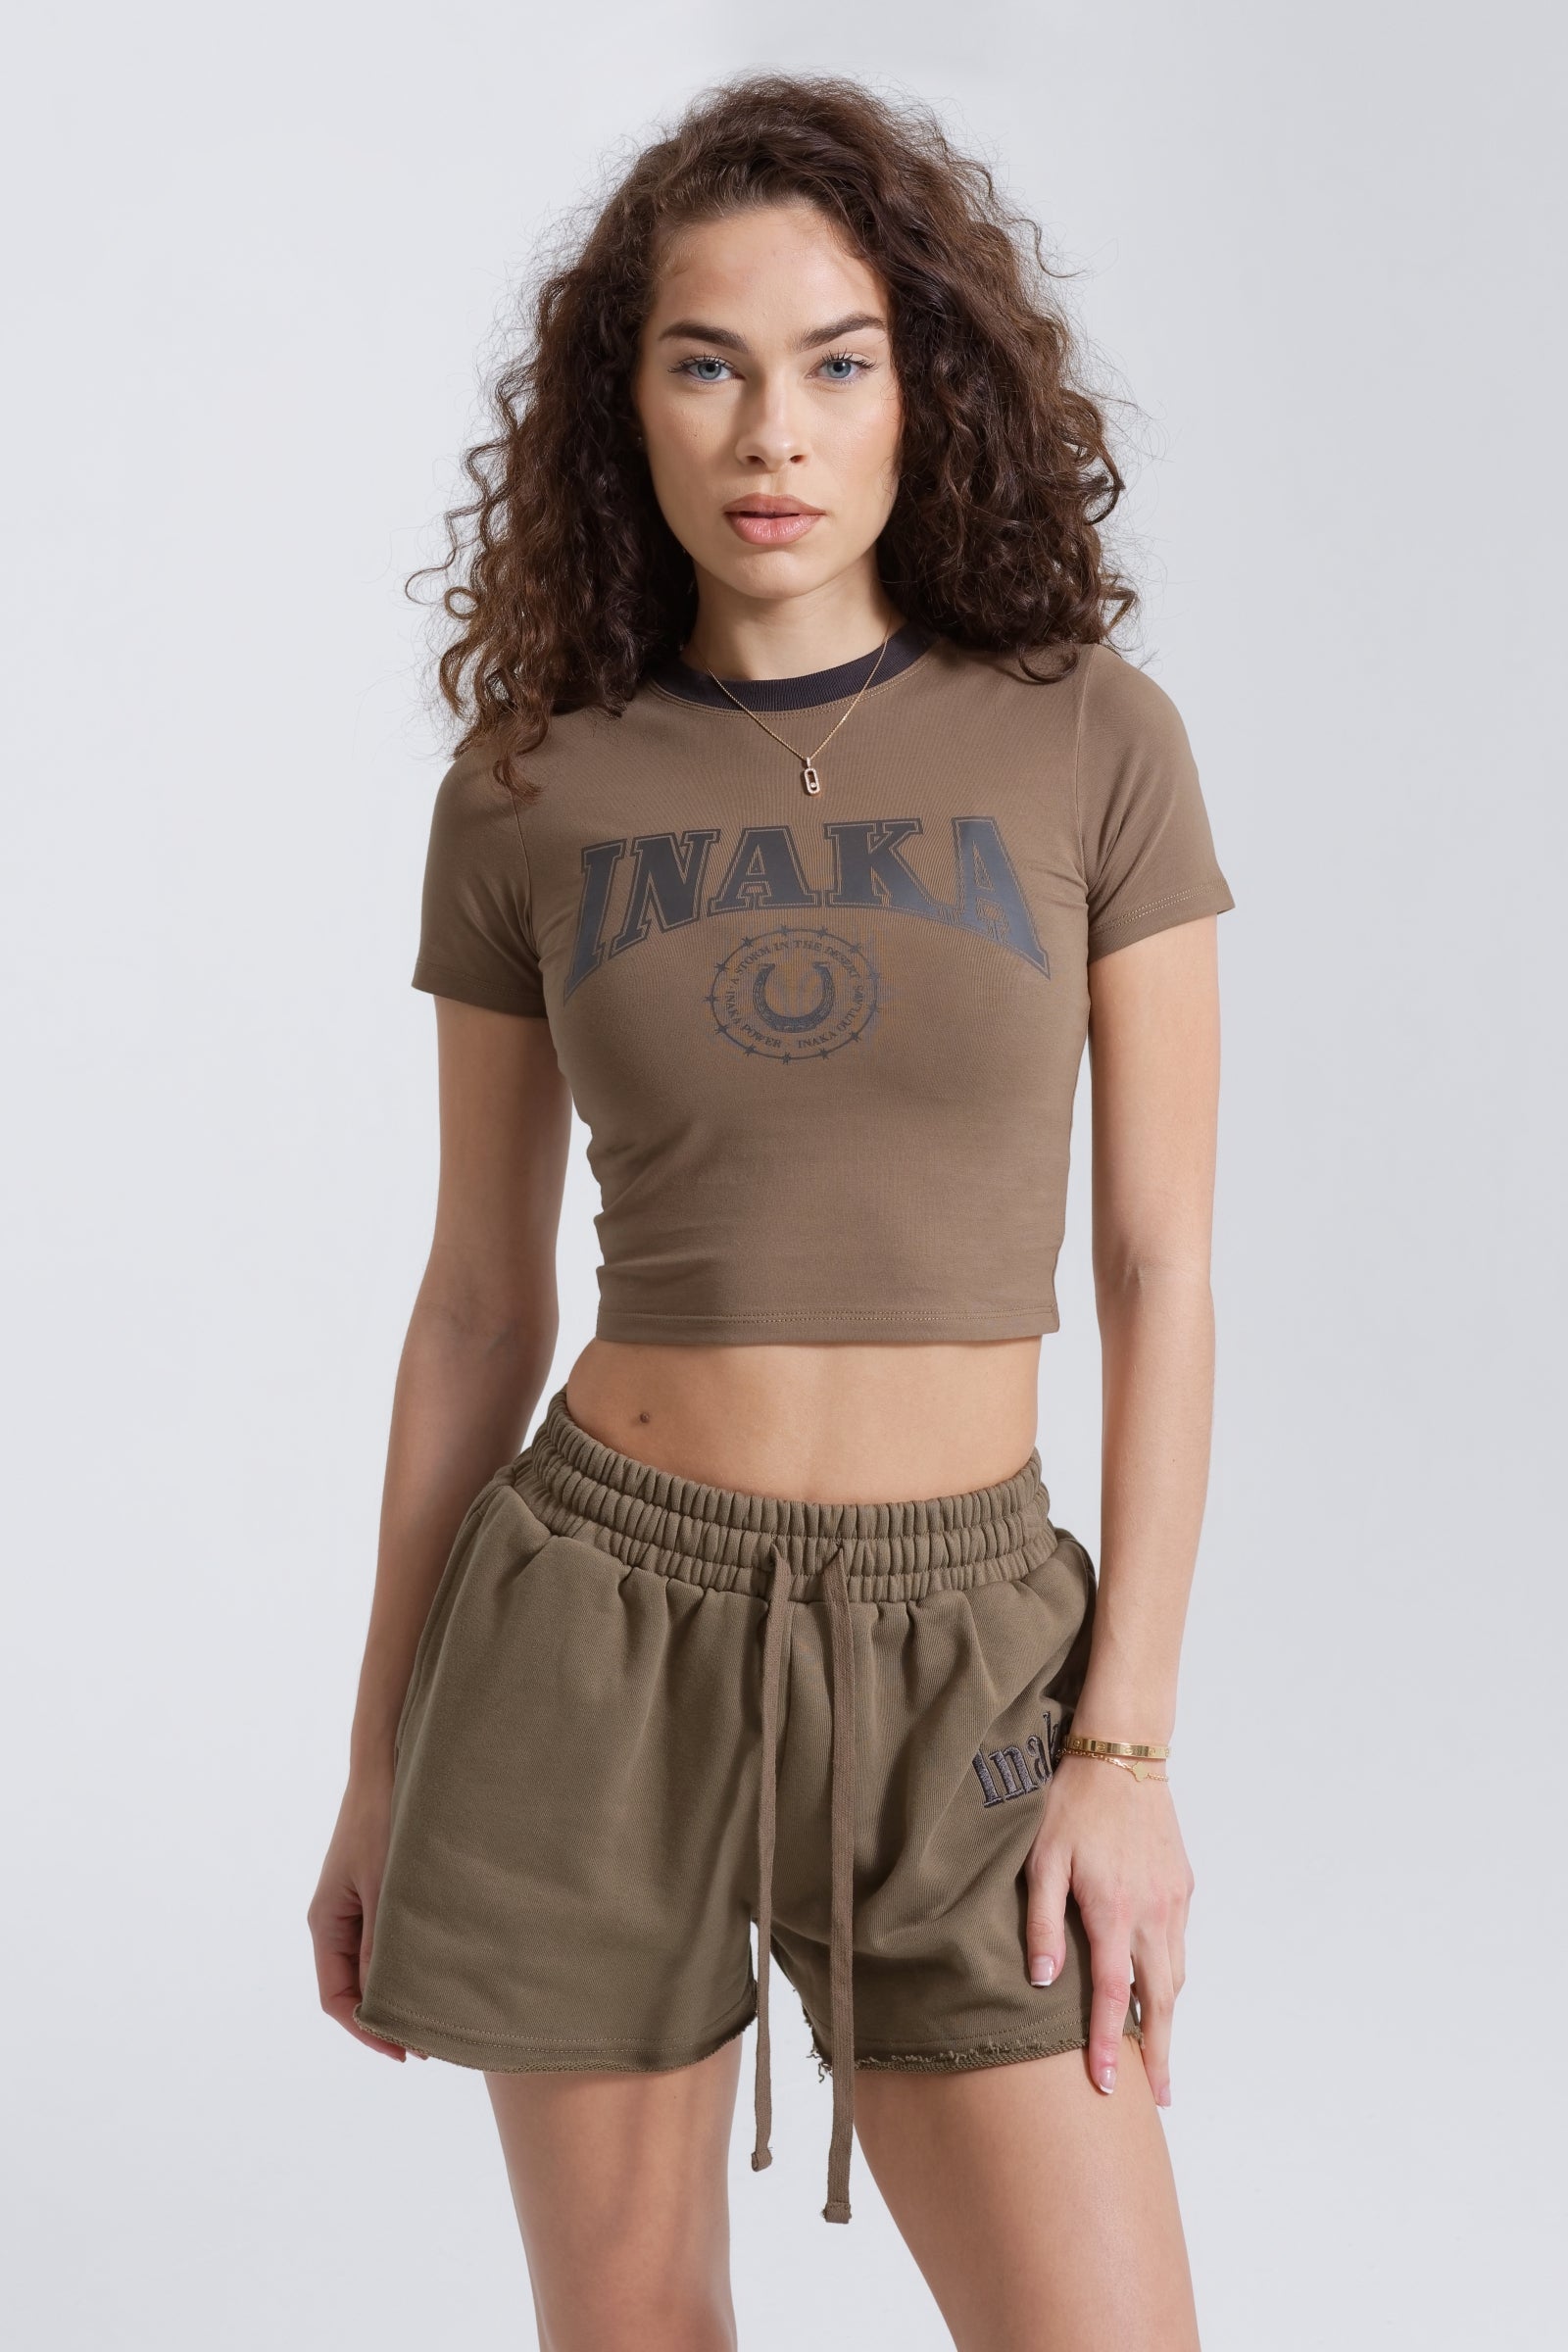 Womens Baby Tee - OutLaw Wood